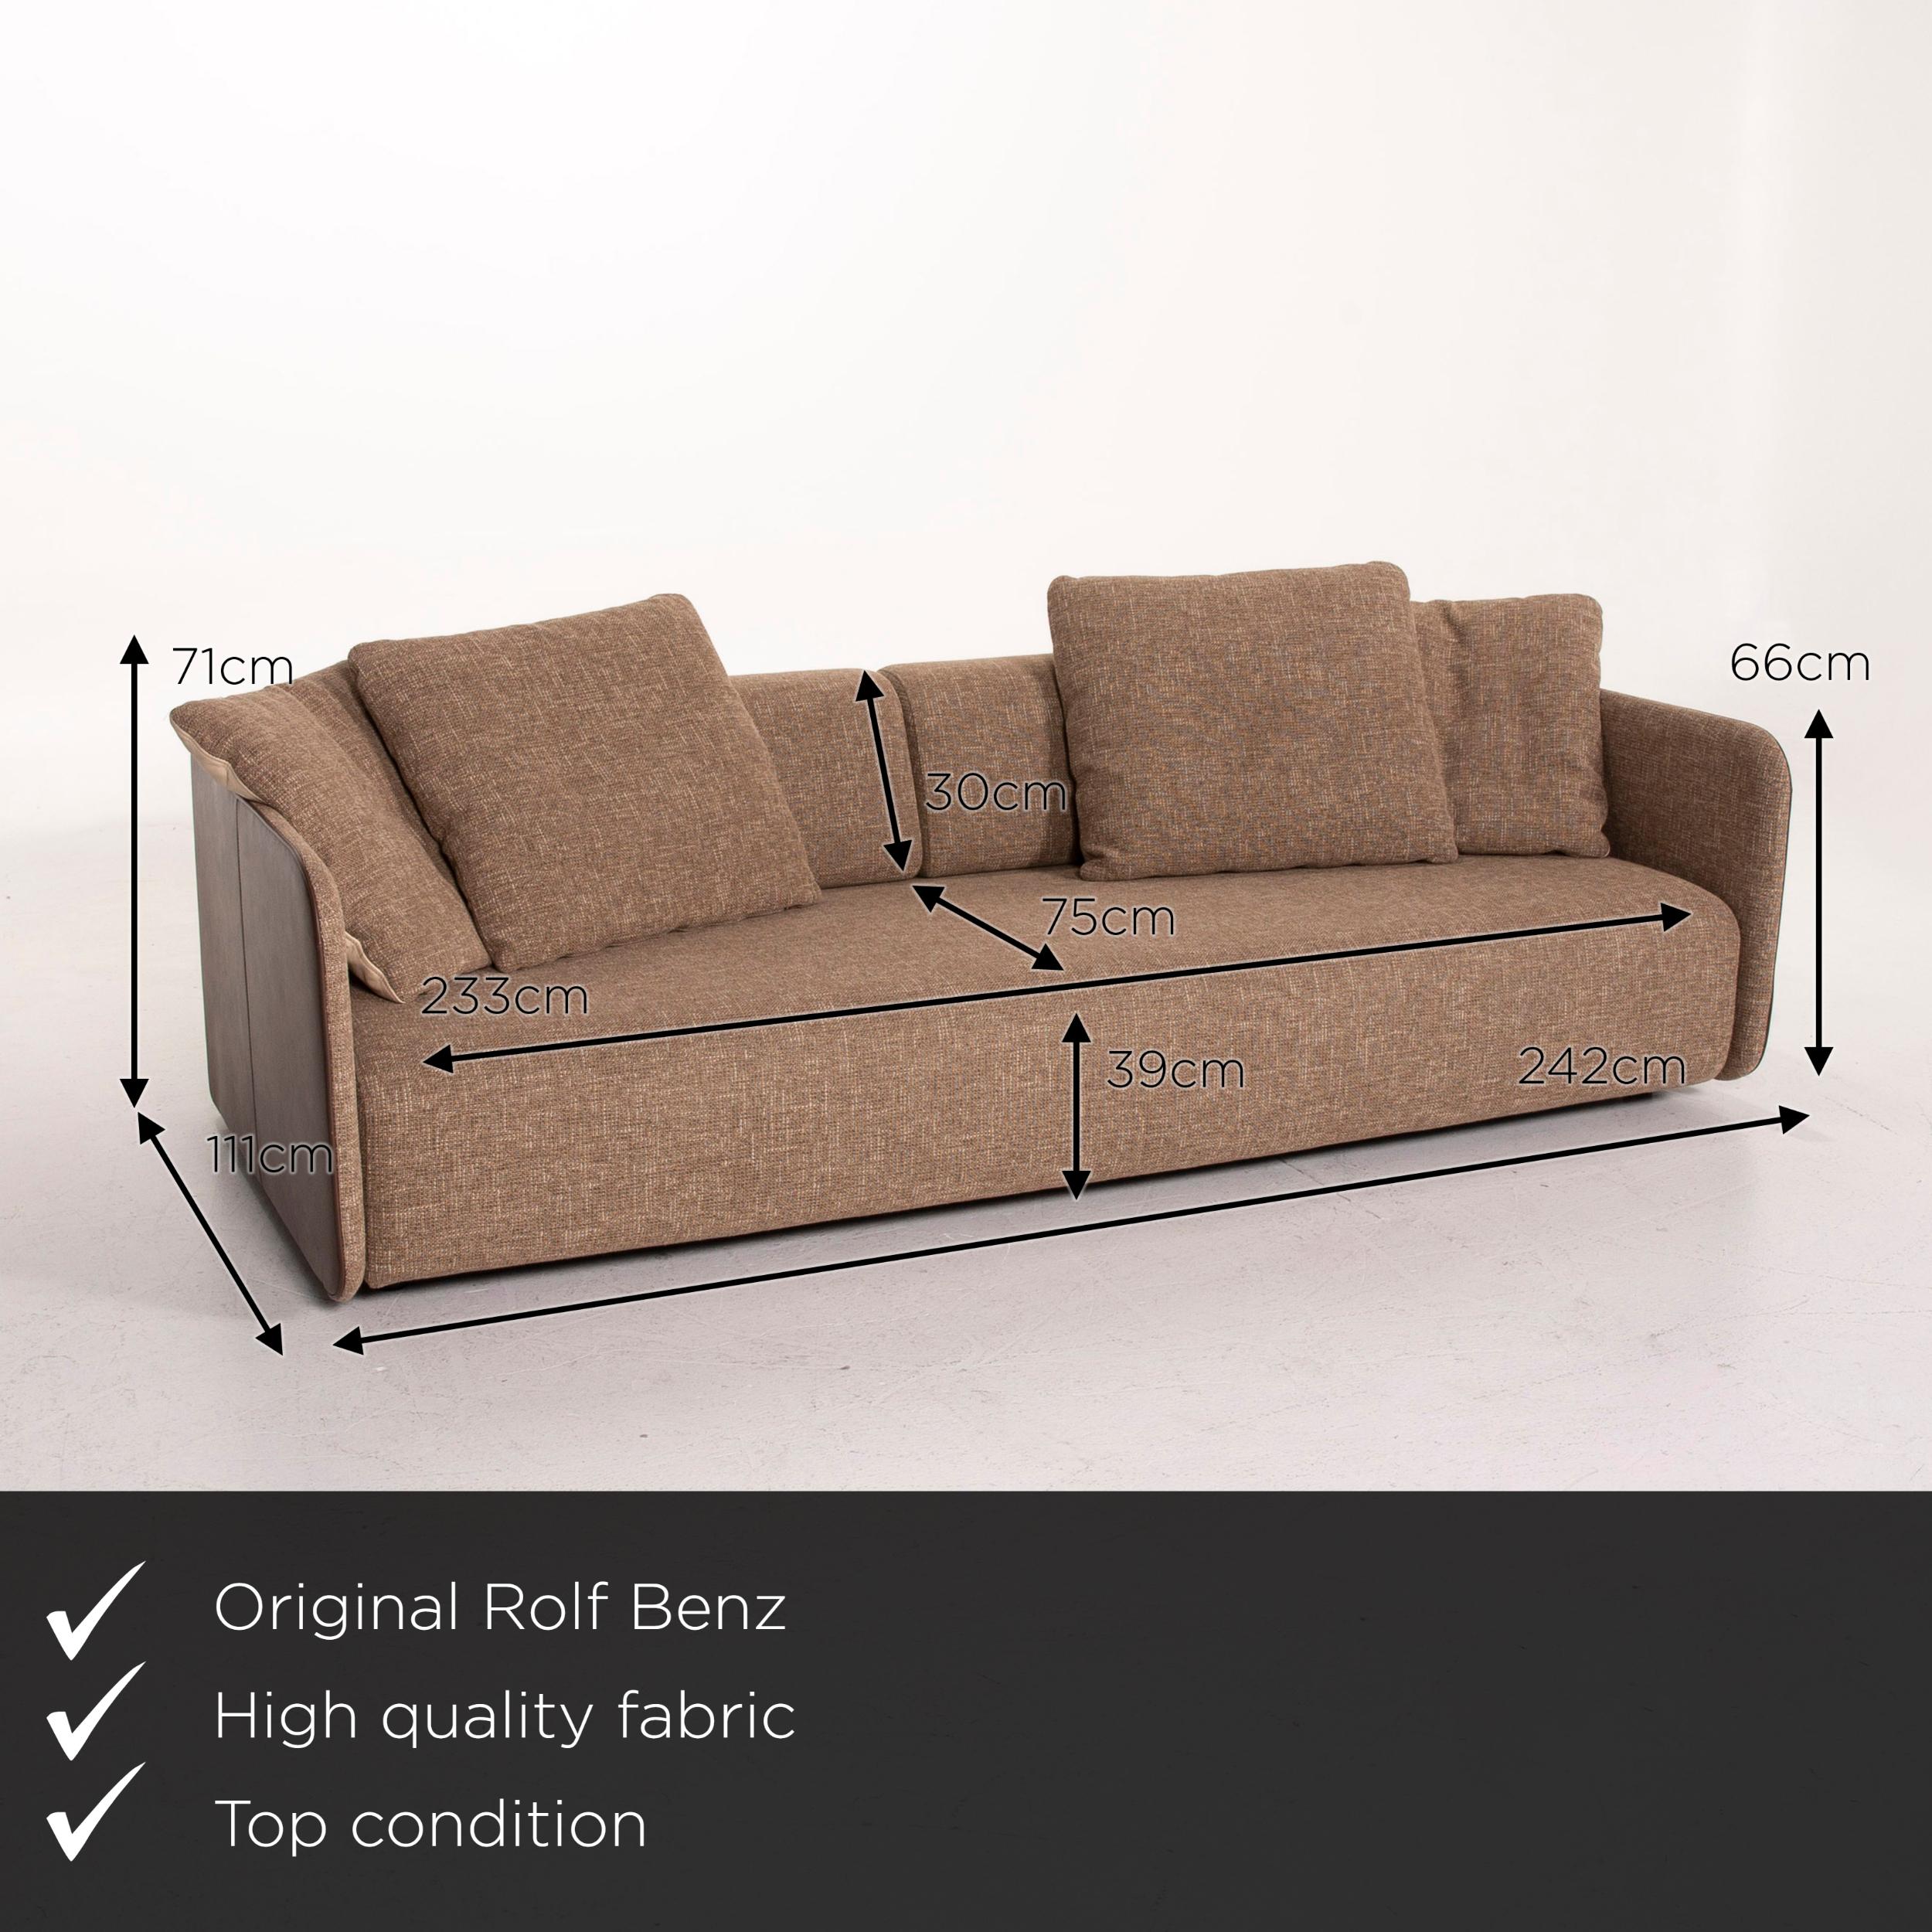 We present to you a Rolf Benz 6900 fabric sofa brown three-seat couch.


 Product measurements in centimeters:
 

Depth 111
Width 242
Height 71
Seat height 39
Rest height 66
Seat depth 75
Seat width 233
Back height 30.
 